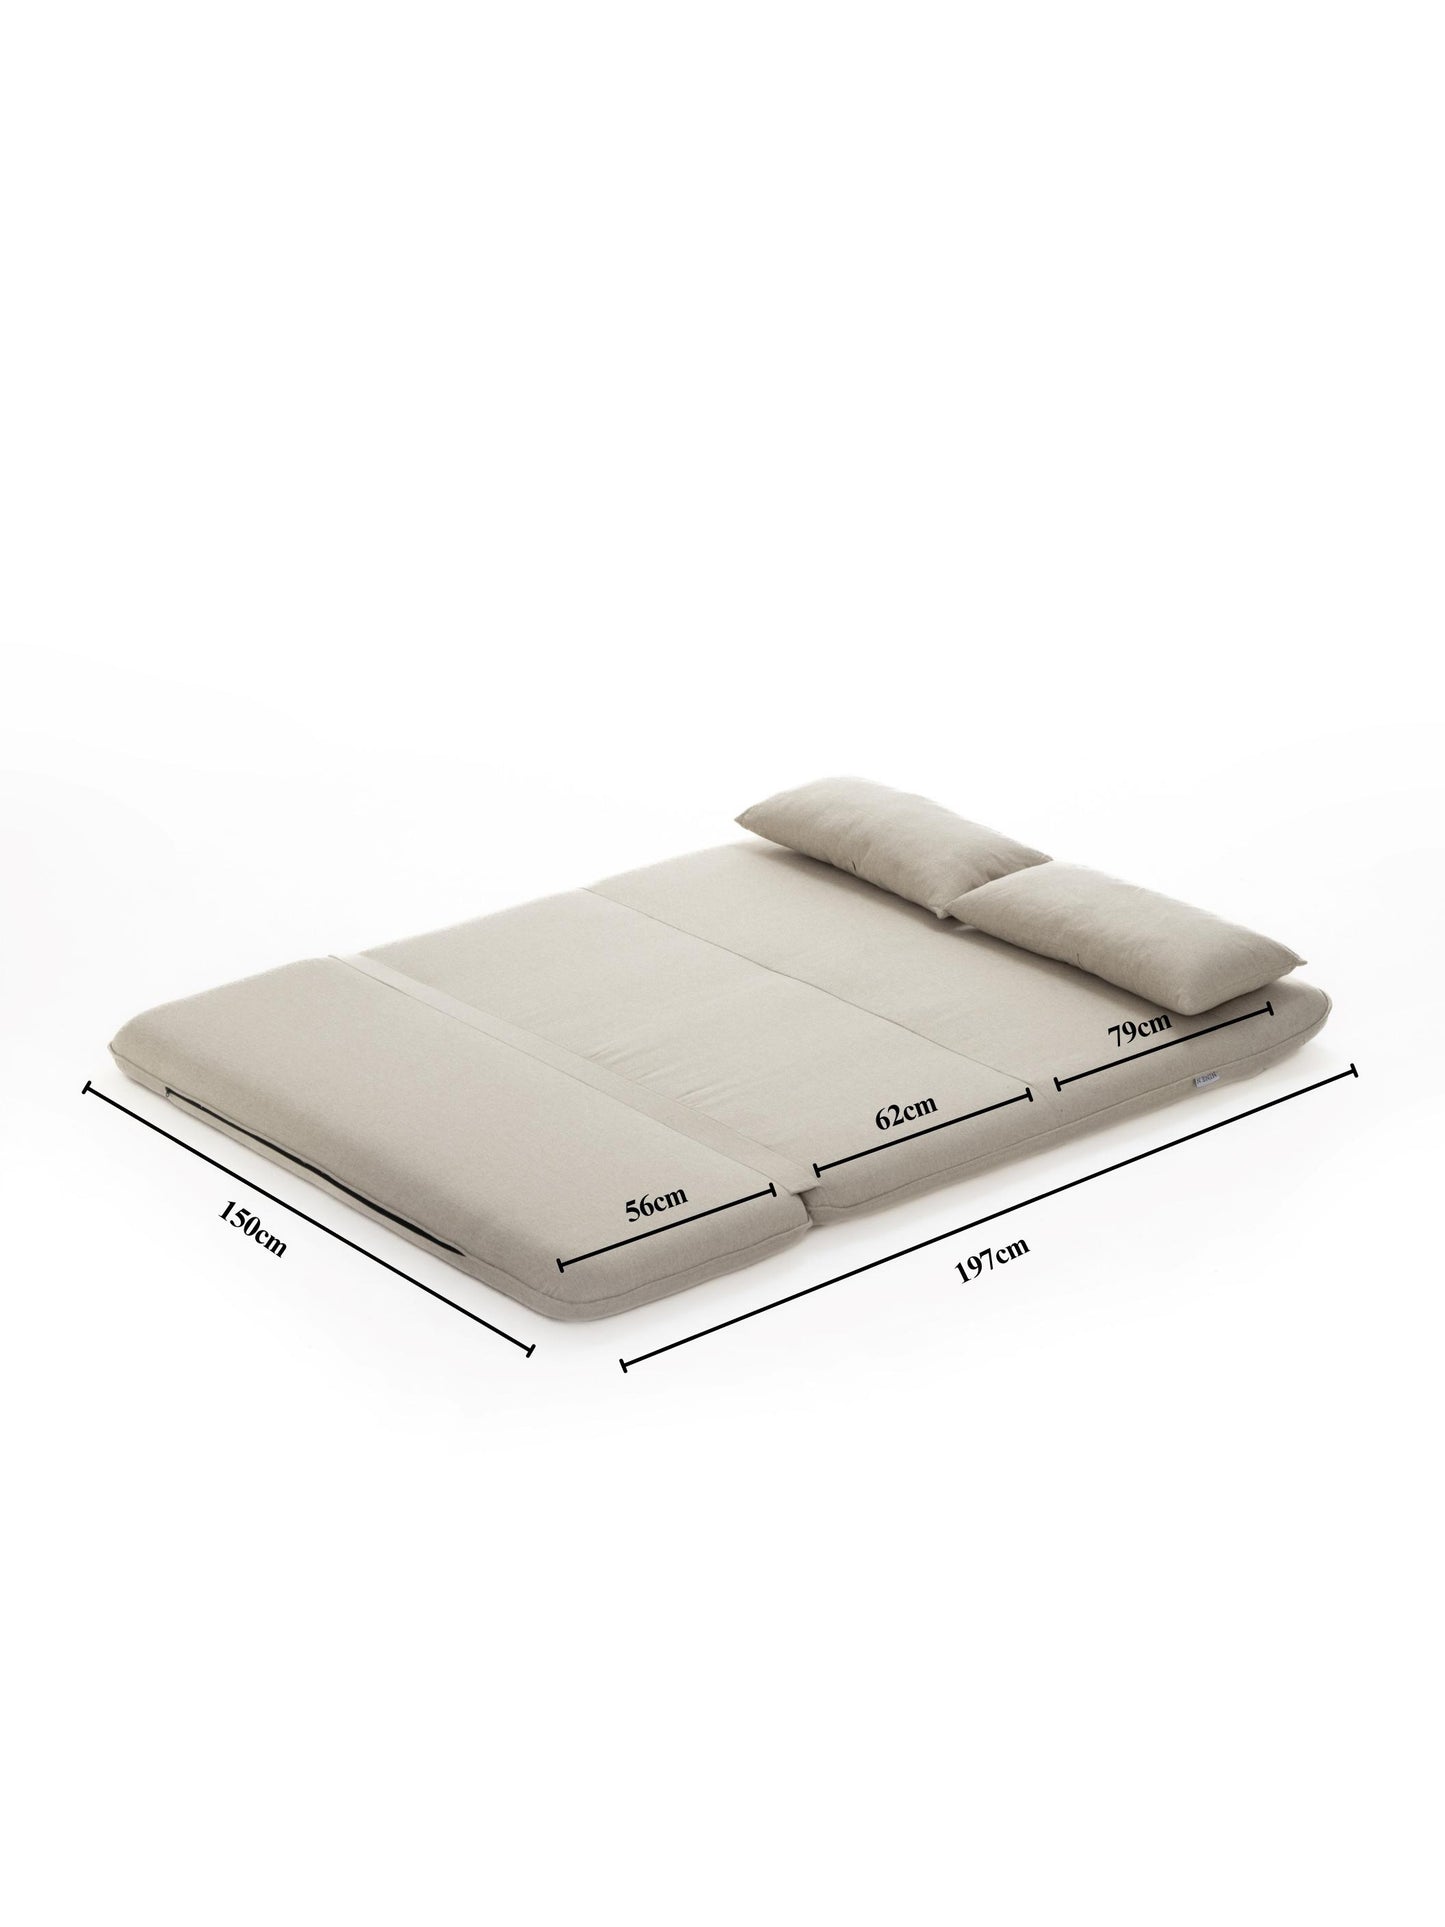 < 20% OFF > Beddo Floor Sofa Bed for Two + 2 Throw Cushions in Linen (Preorder)